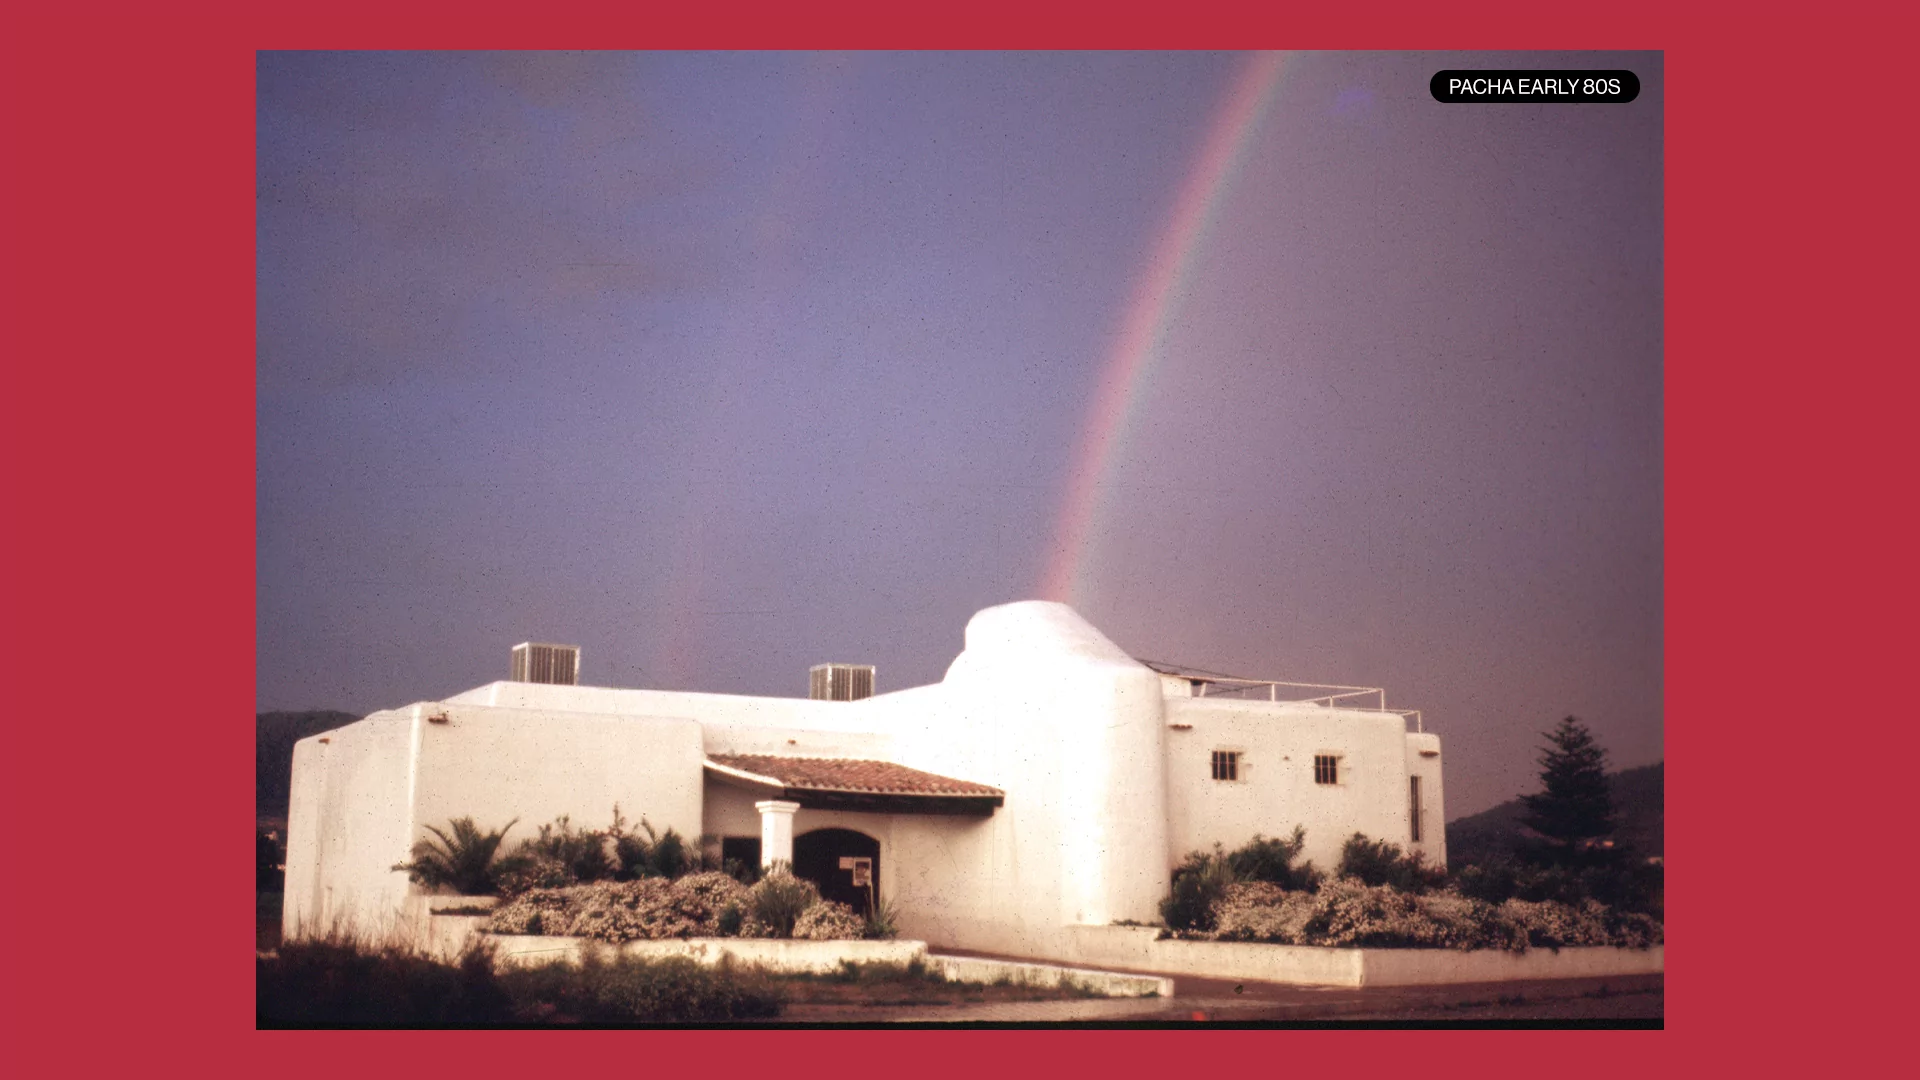 Photo of the Pacha Ibiza building early 1980s with a rainbow above it